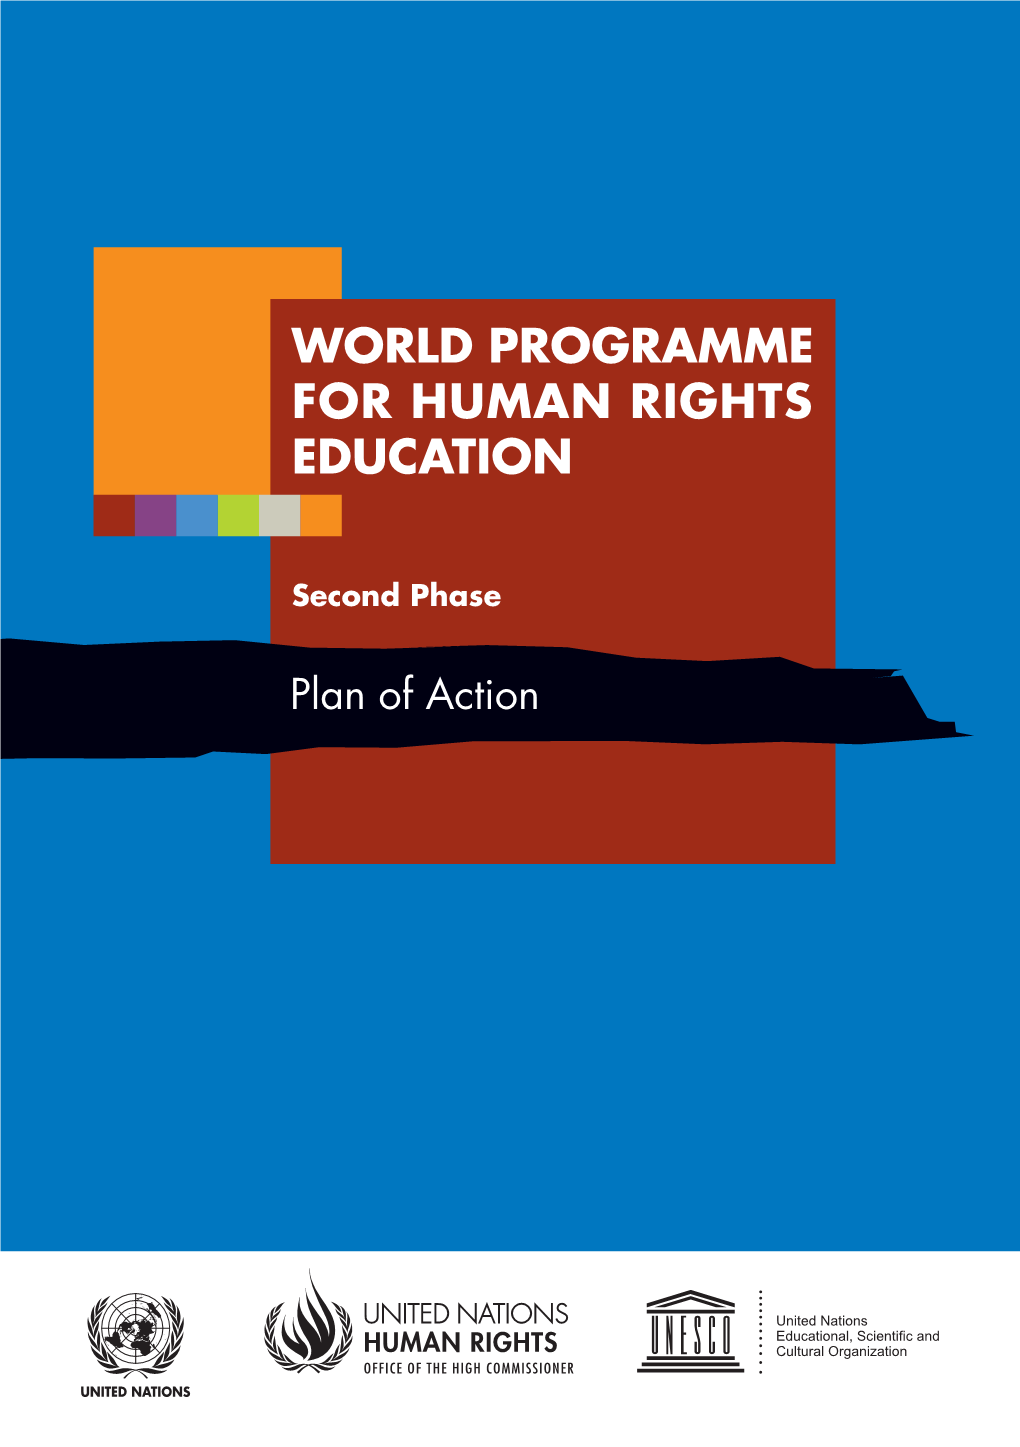 World Programme for Human Rights Education